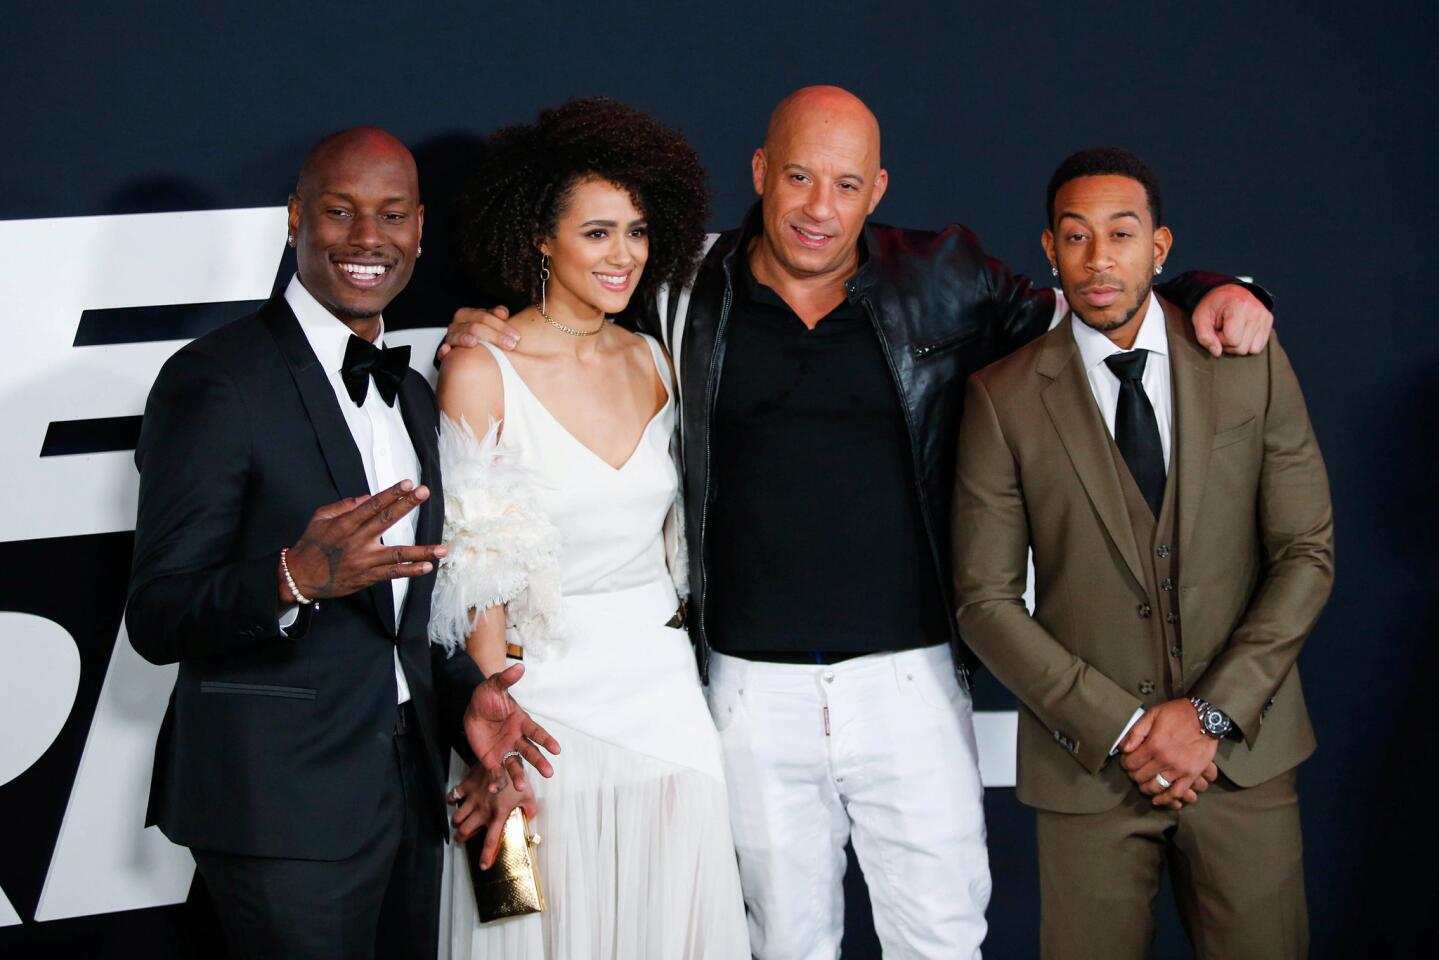 Actors Tyrese Gibson, Nathalie Emmanuell, Vin Diesel and Ludacris attend 'The Fate Of The Furious' New York premiere at Radio City Music Hall in New York